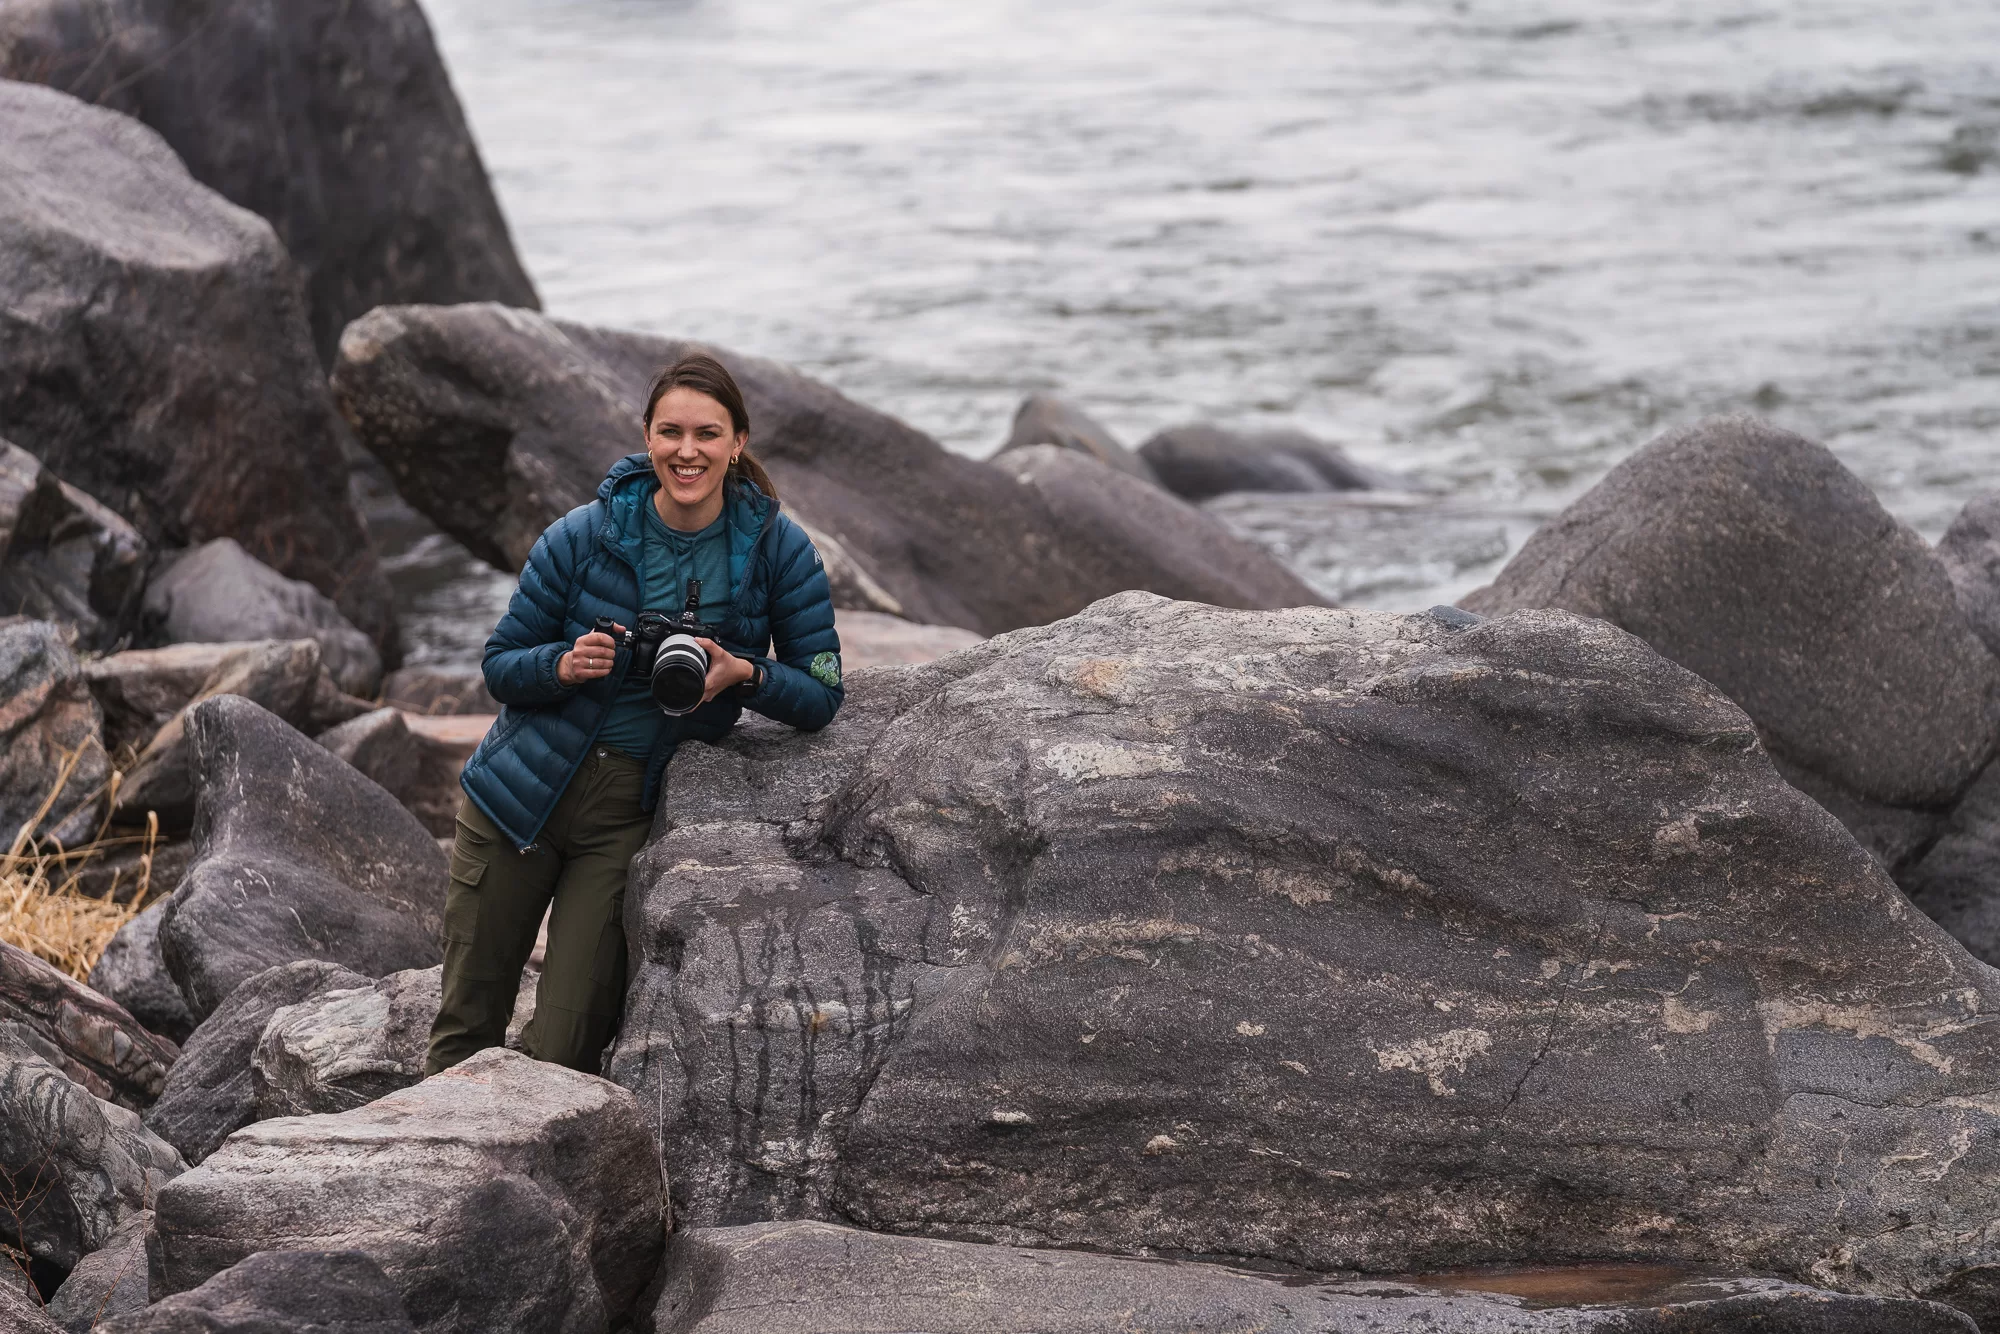 A photographer leans against a rock next to a river and smiles at the camera.